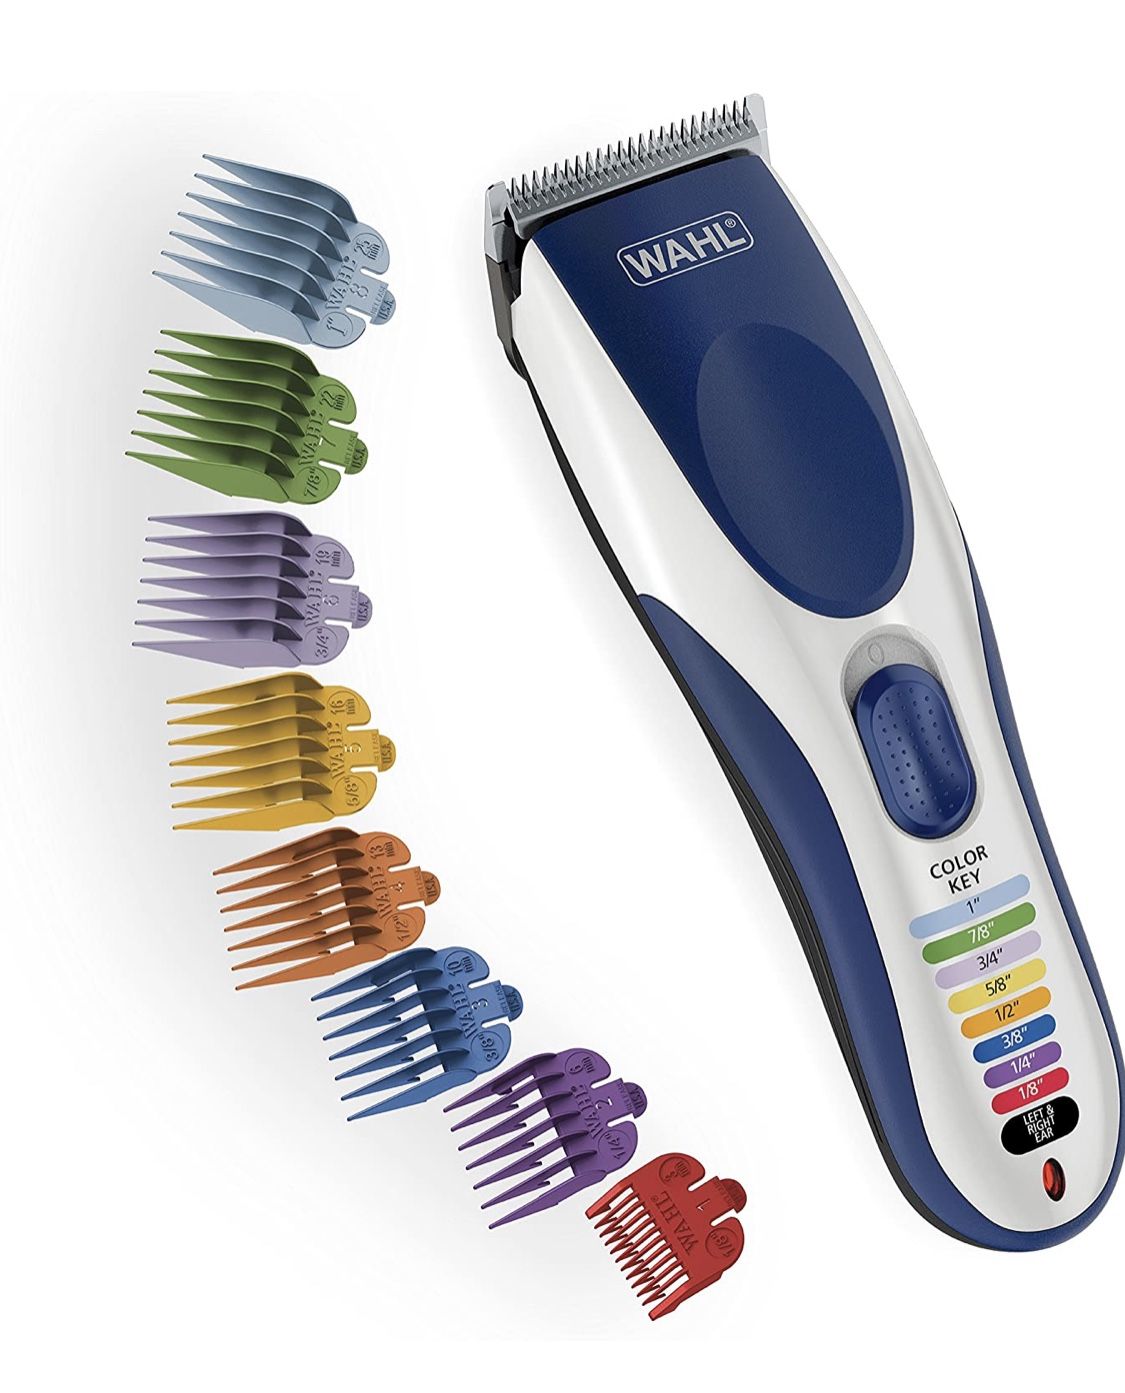 Wahl Color Pro 9649 Cordless Rechargeable Hair Clipper Kit Color Coded Guide NEW